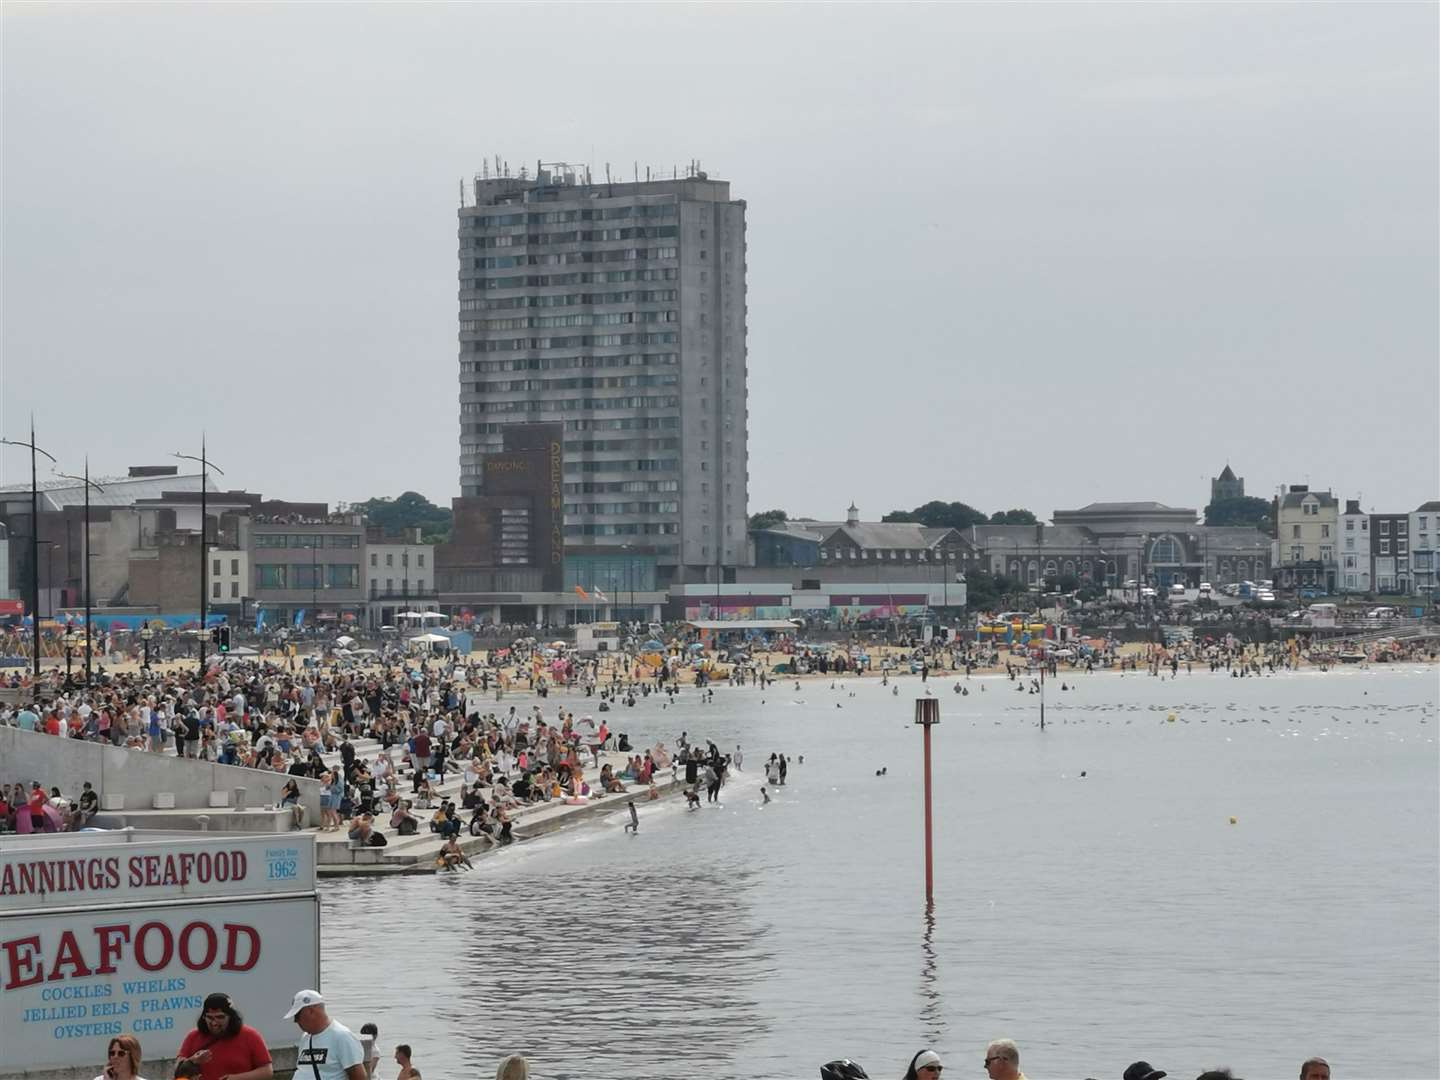 Margate has been ranked one of the best places in the UK